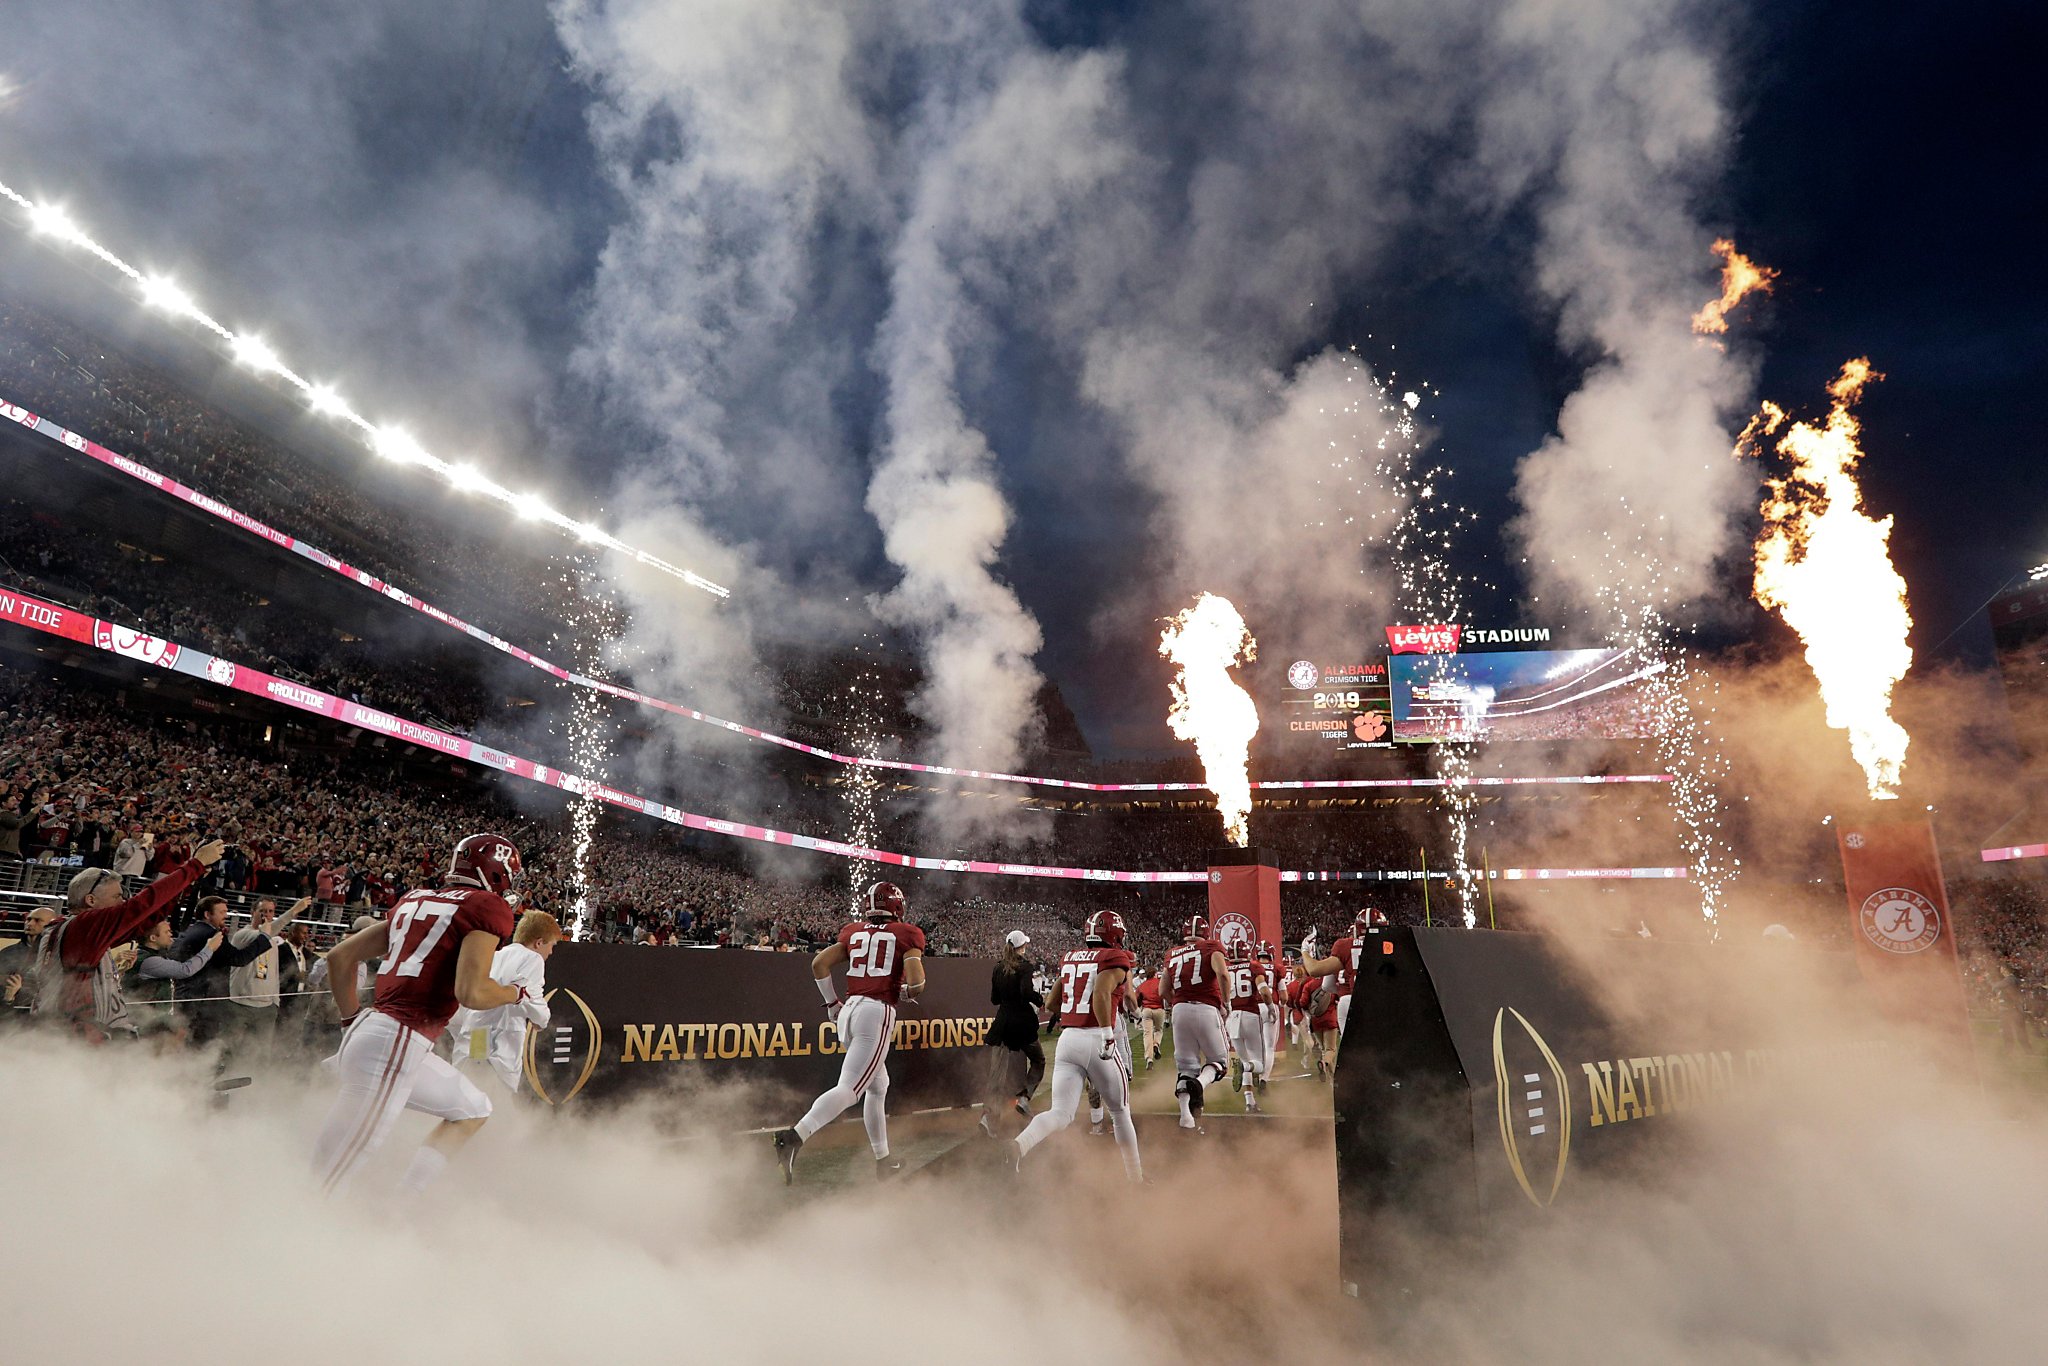 Could Levi's Stadium rock for 49ers as it did for national championship?